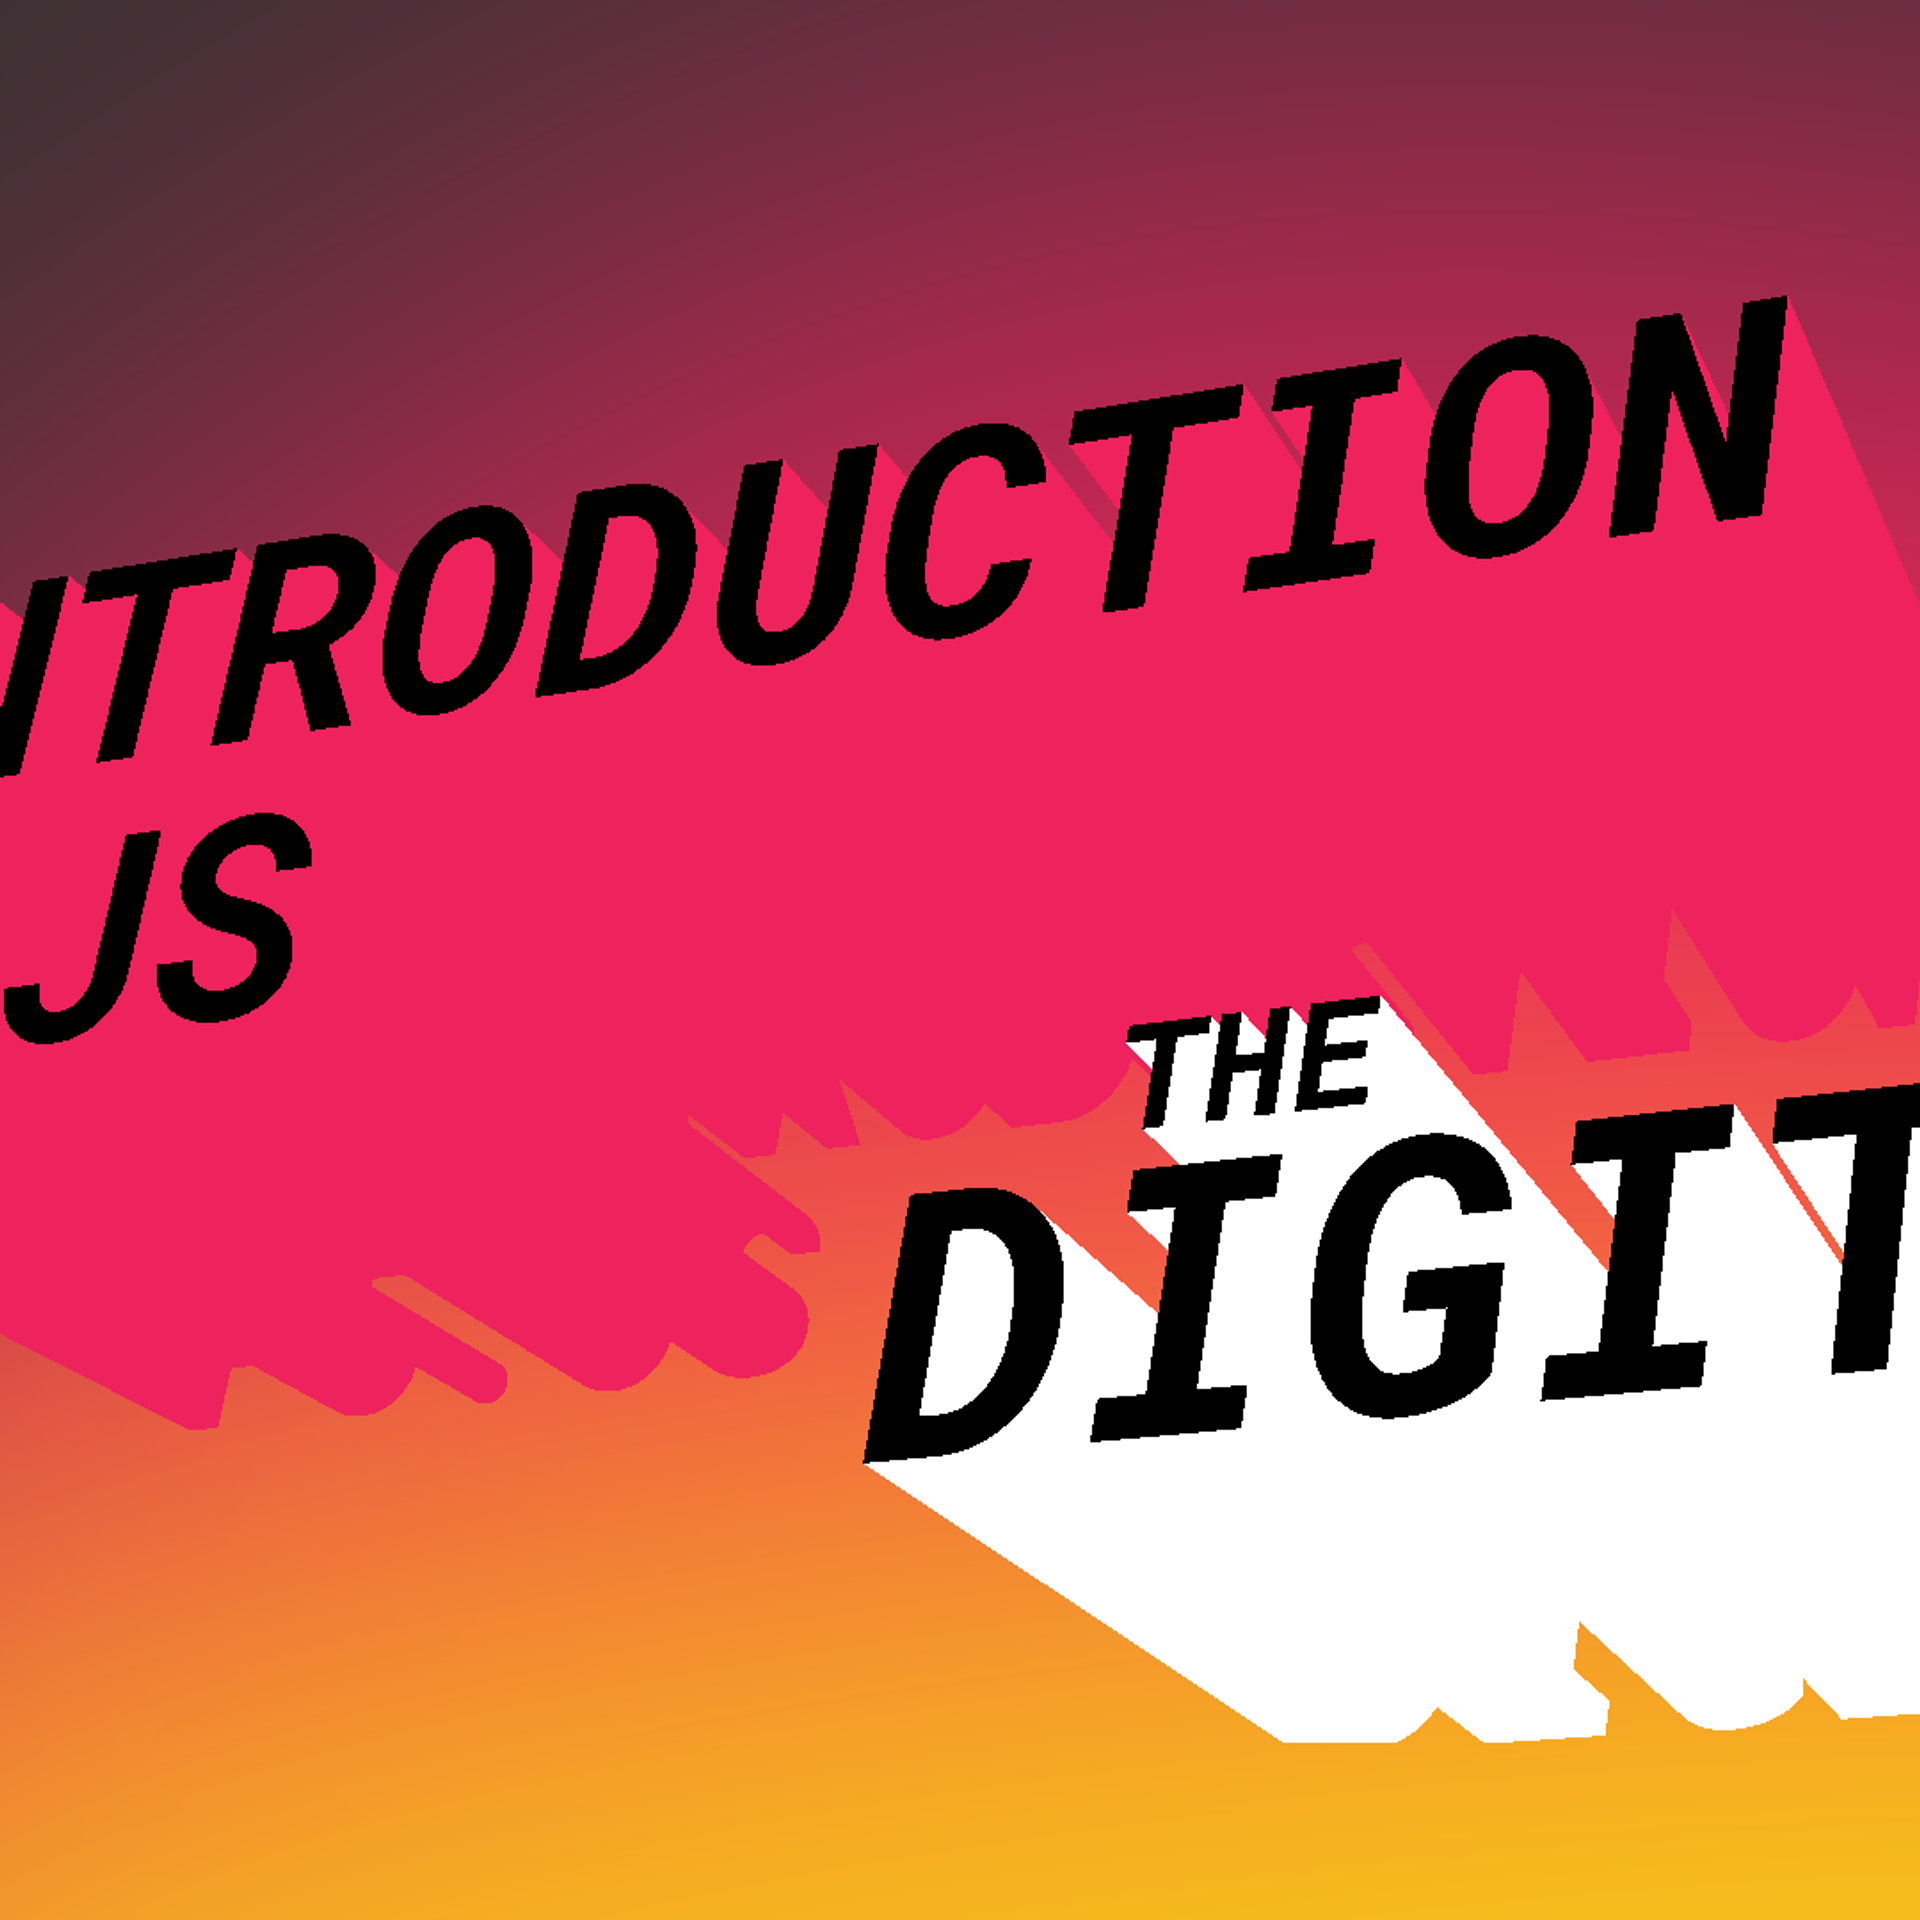 Introduction to p5.js